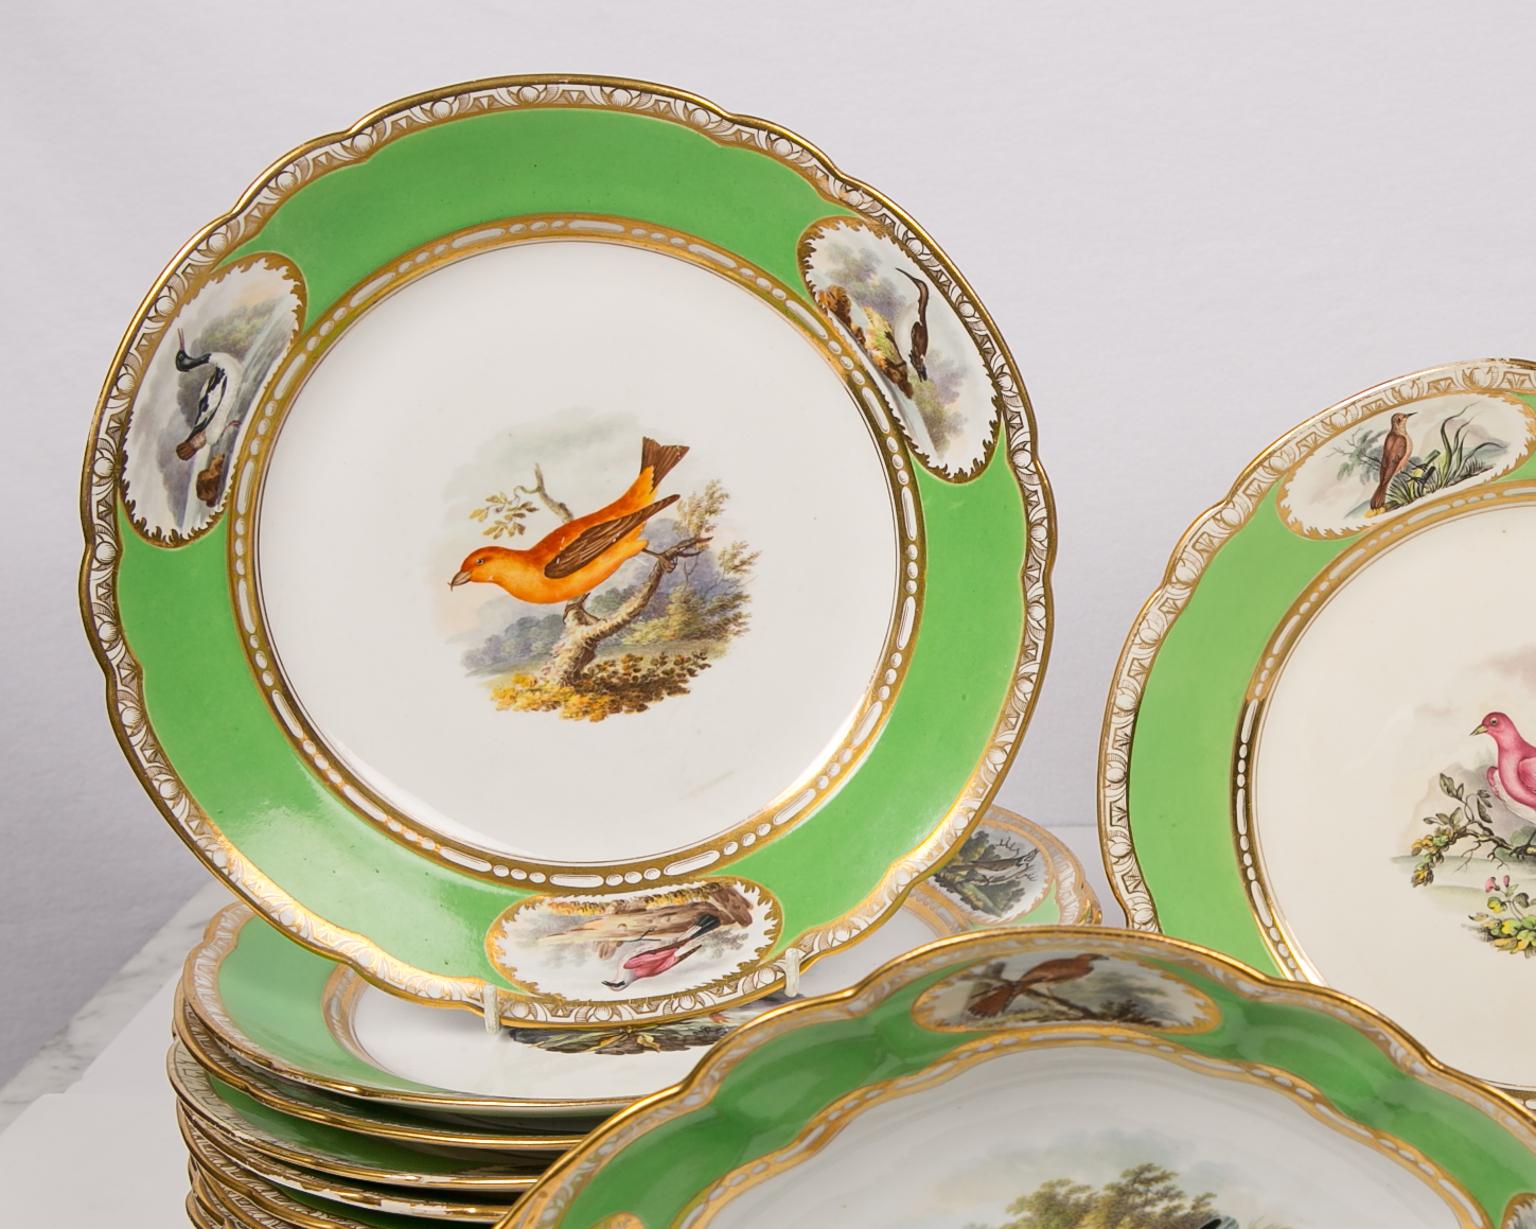 Why we love it:
The birds are wonderful and the apple green border frames them beautifully.

A bird lover's set of antique Spode dishes with hand painted birds and appealing apple green borders. What makes these dishes so special is the beautiful